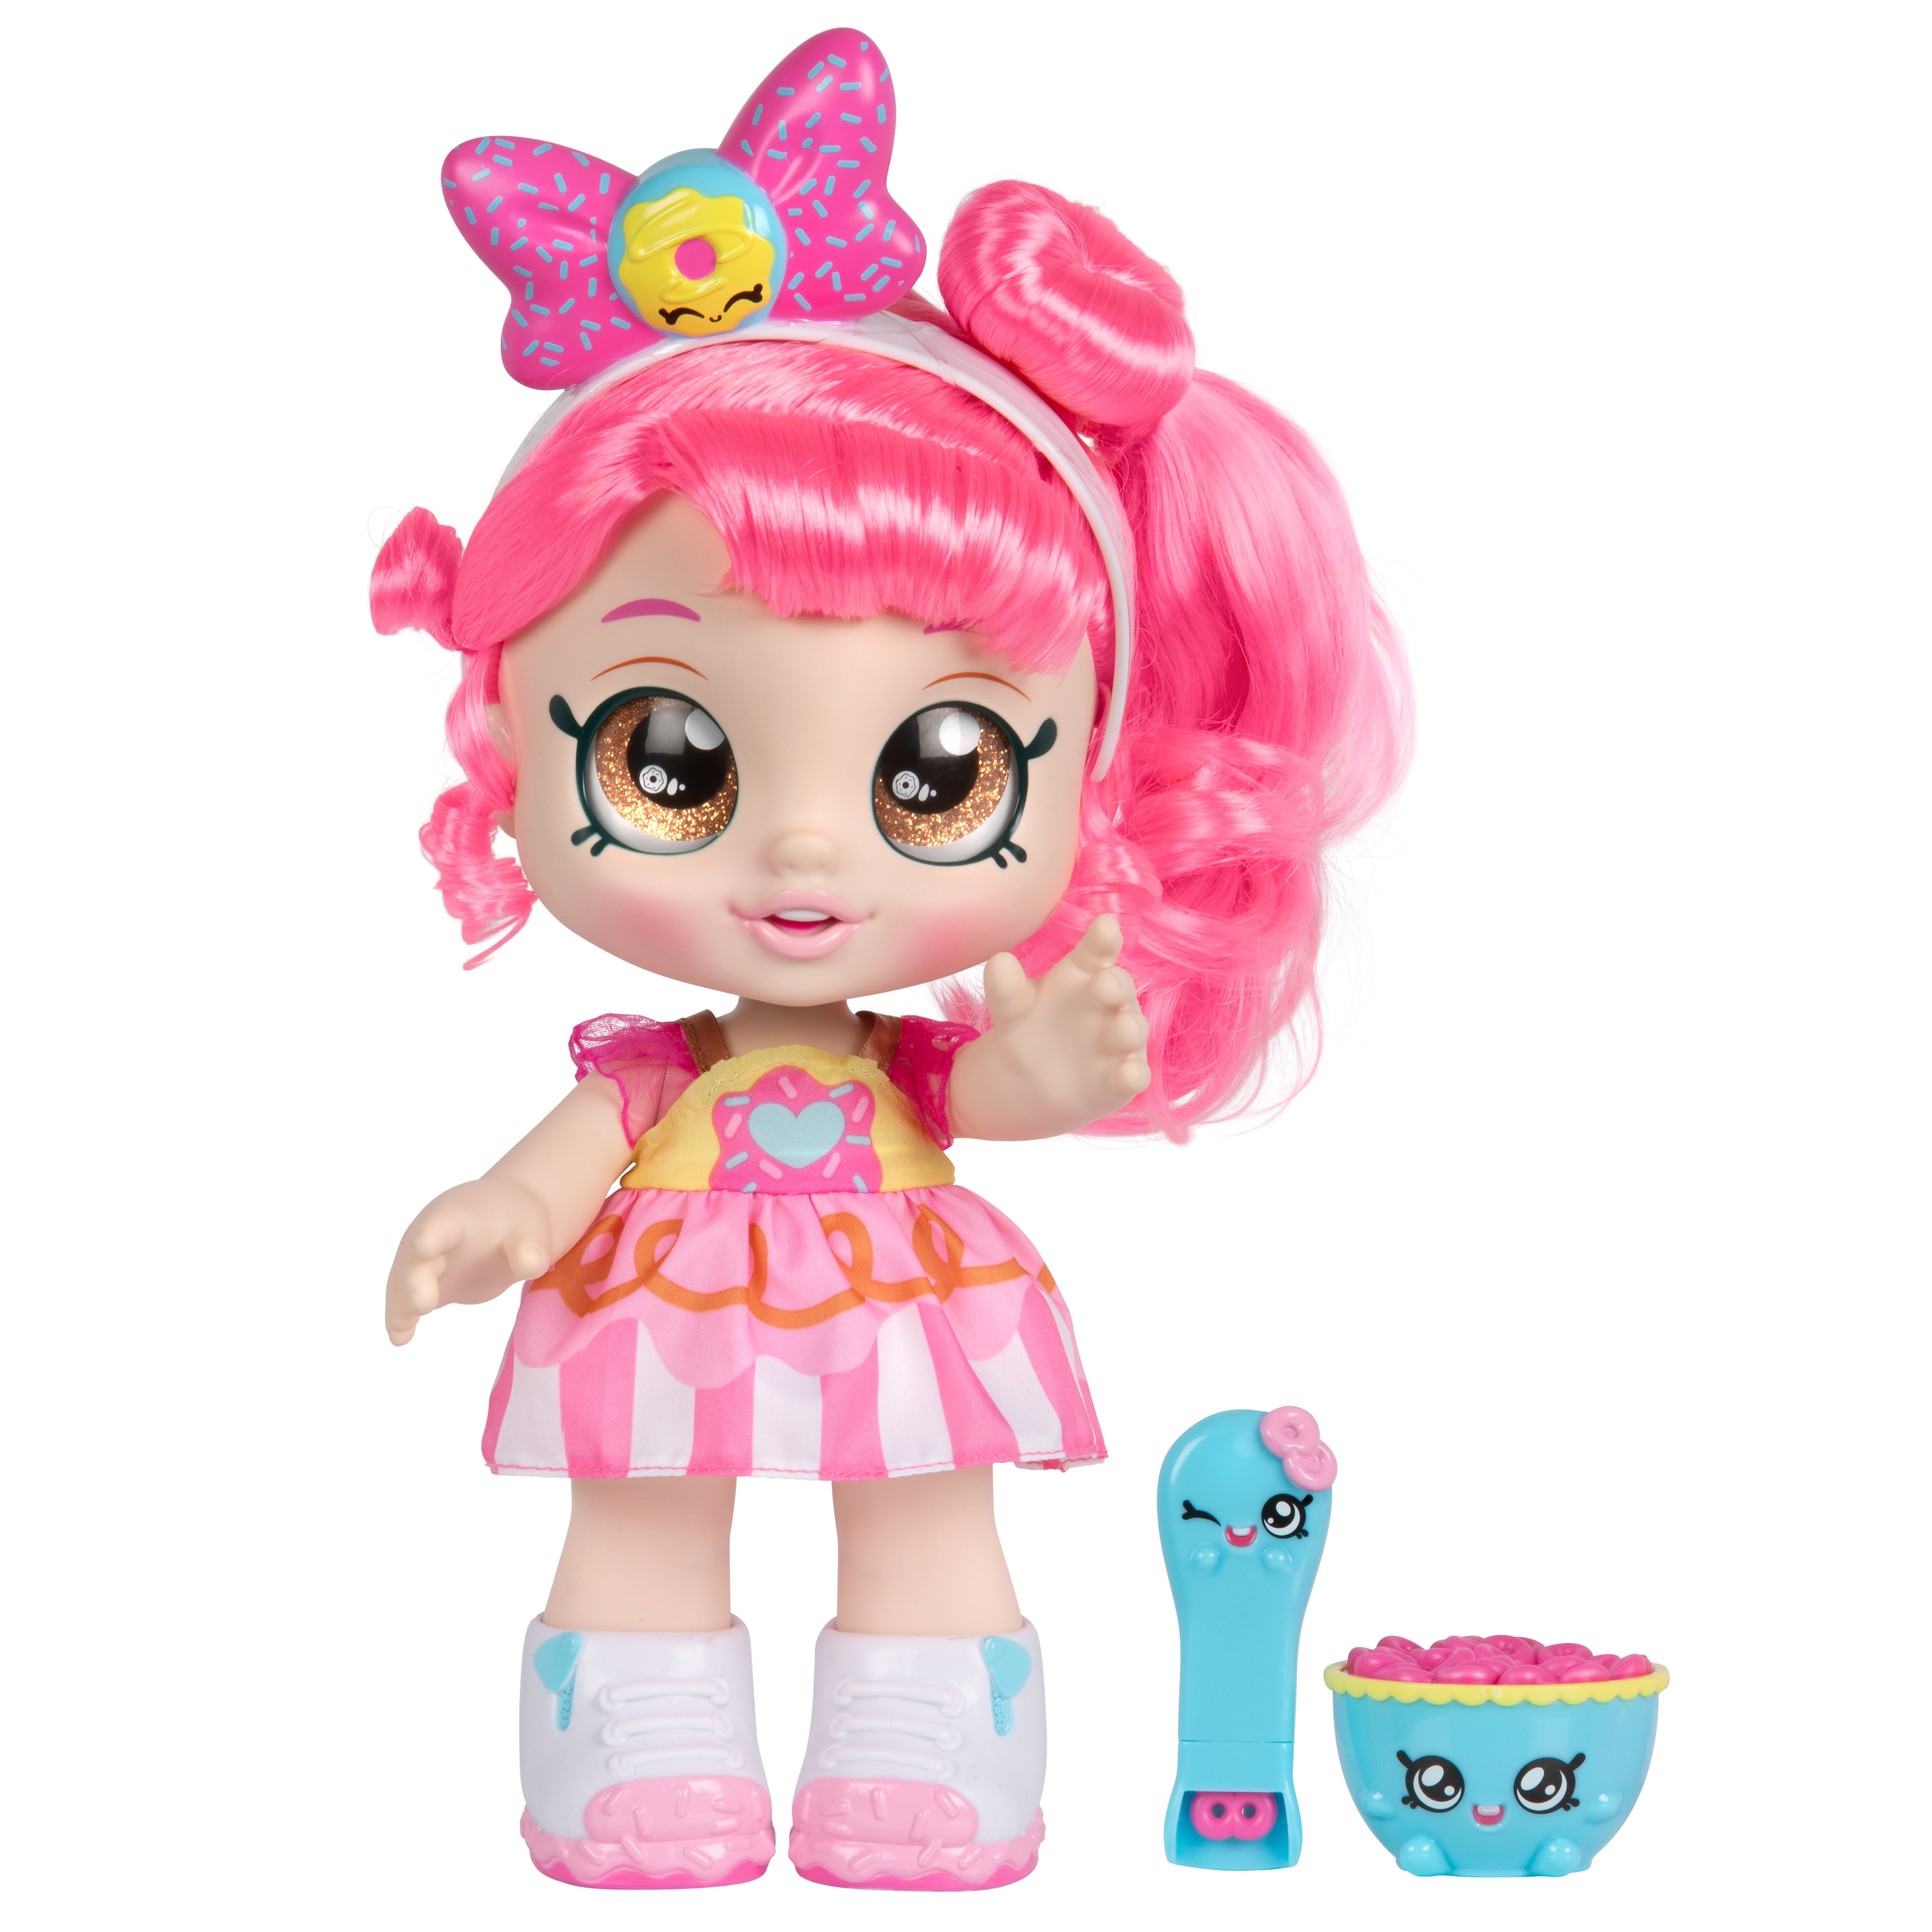 NEW 2020 Kindi Kids 10 inch Toddler Dolls & Accessories in 5 Variations 